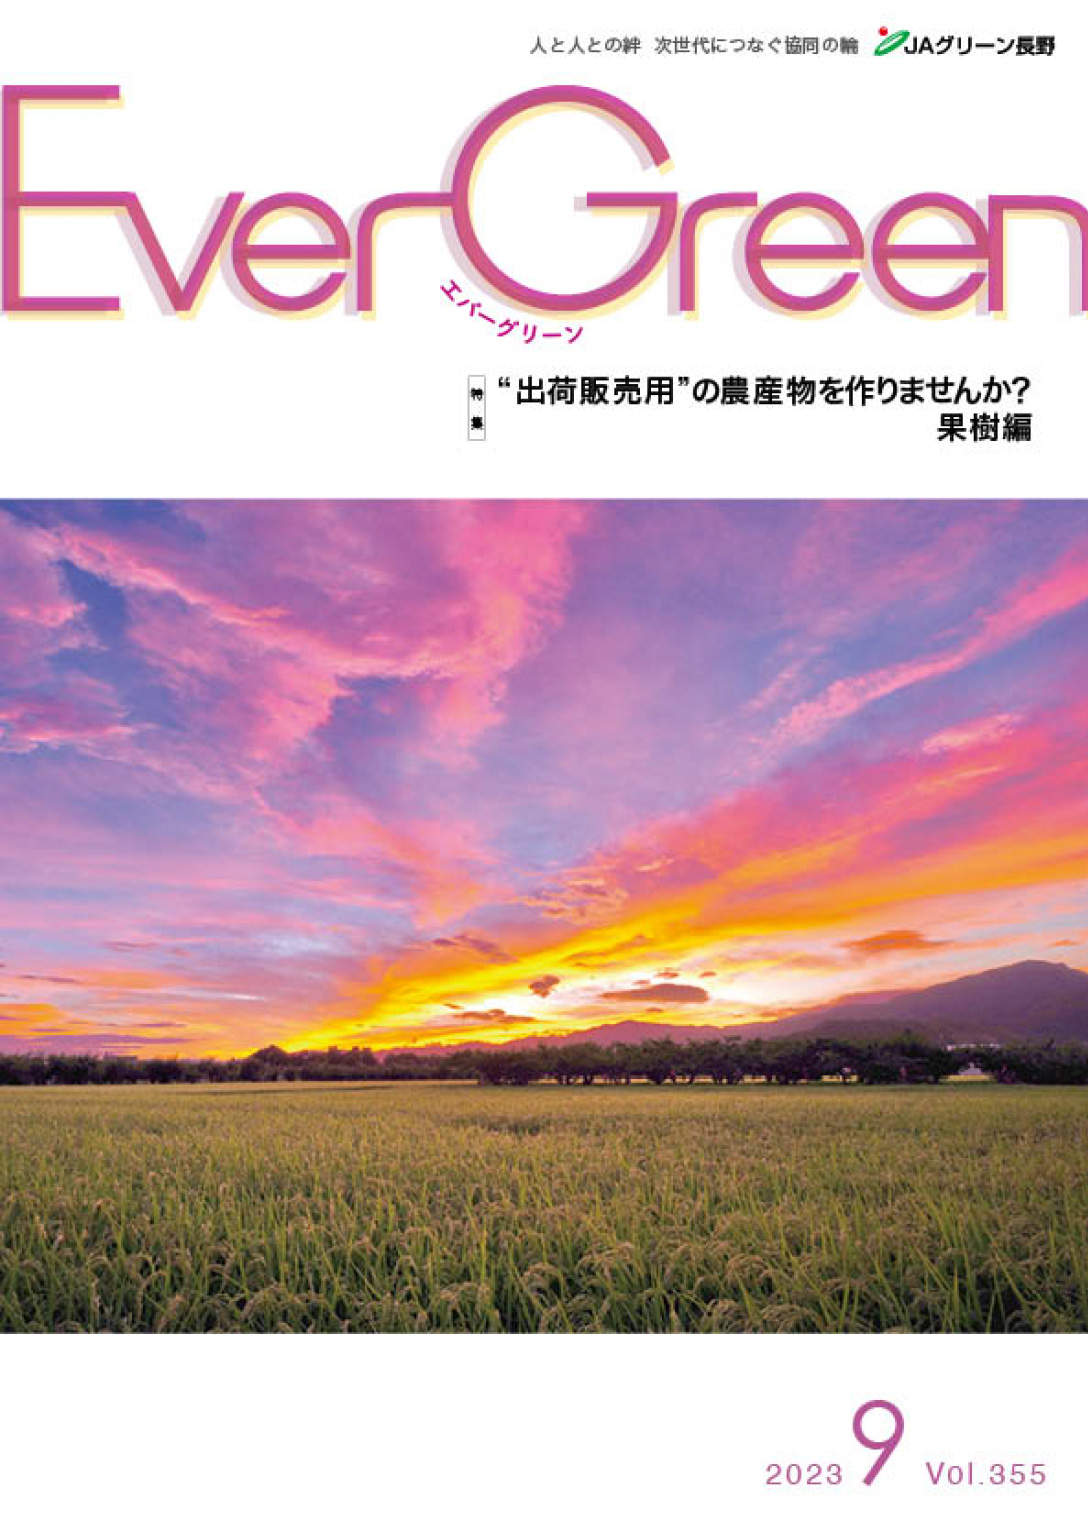 Ever Green9月号発行のご案内